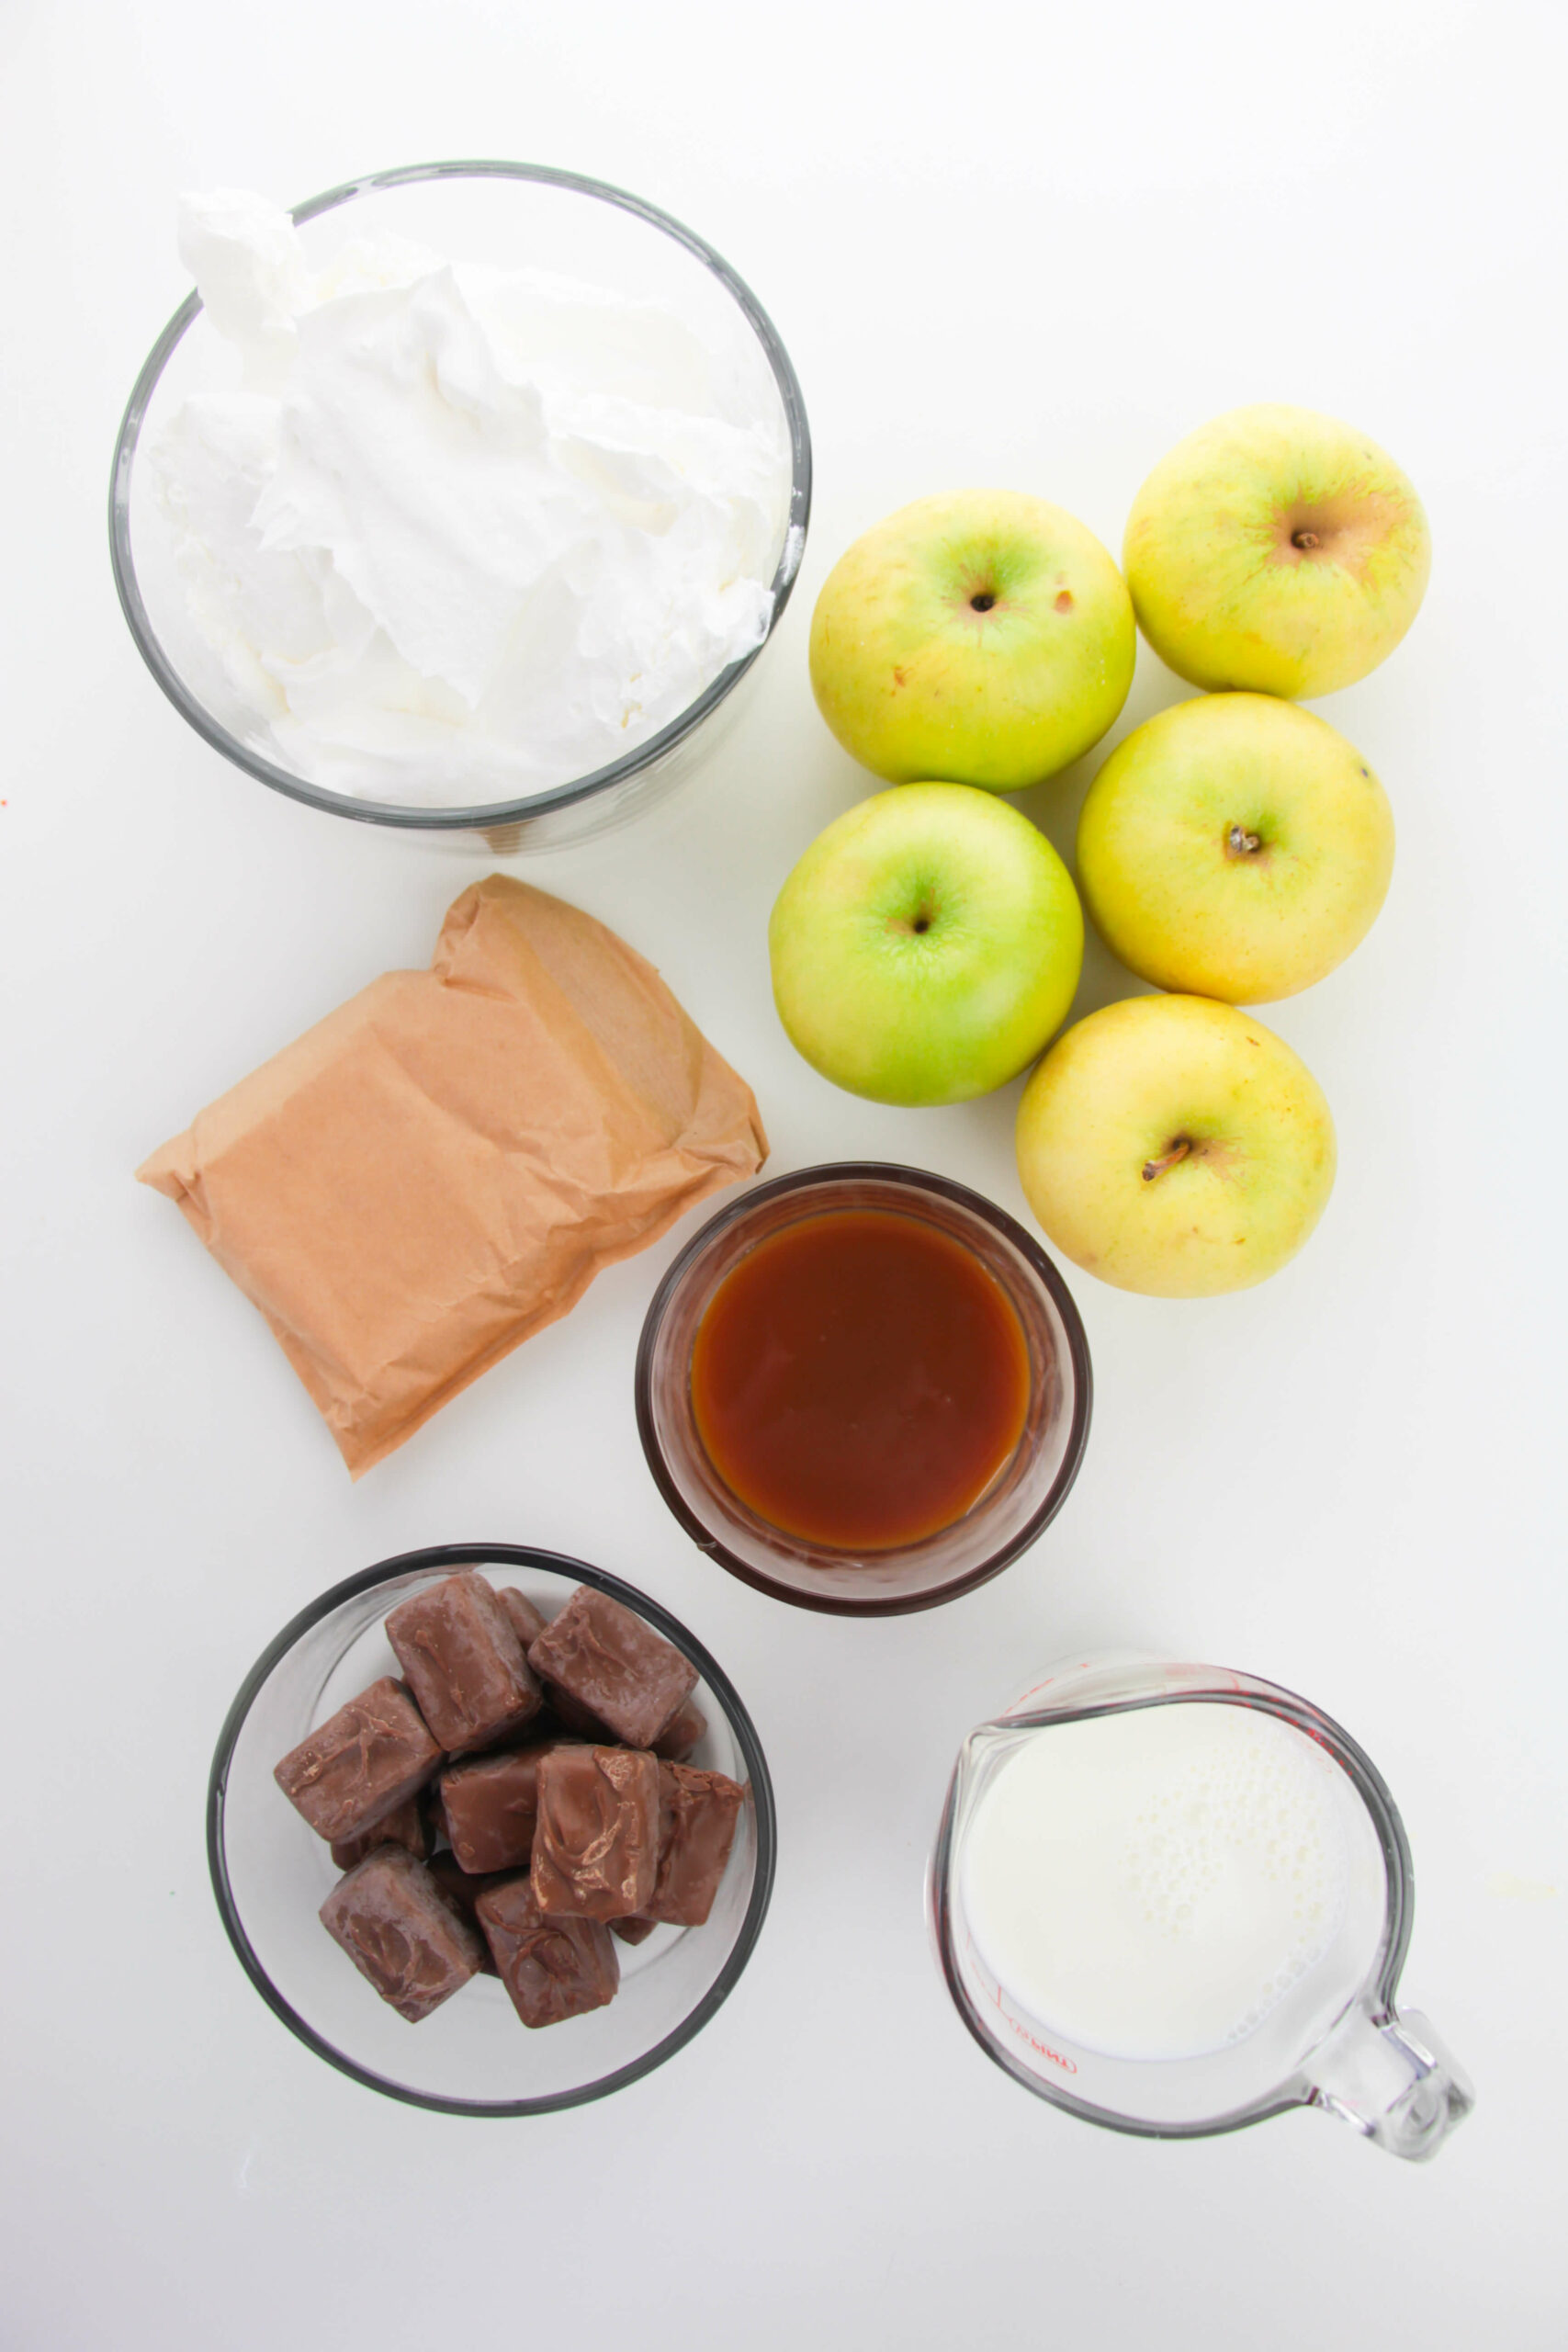 The ingredients of apples whip topping, pudding mix and cand bars on a white surface.